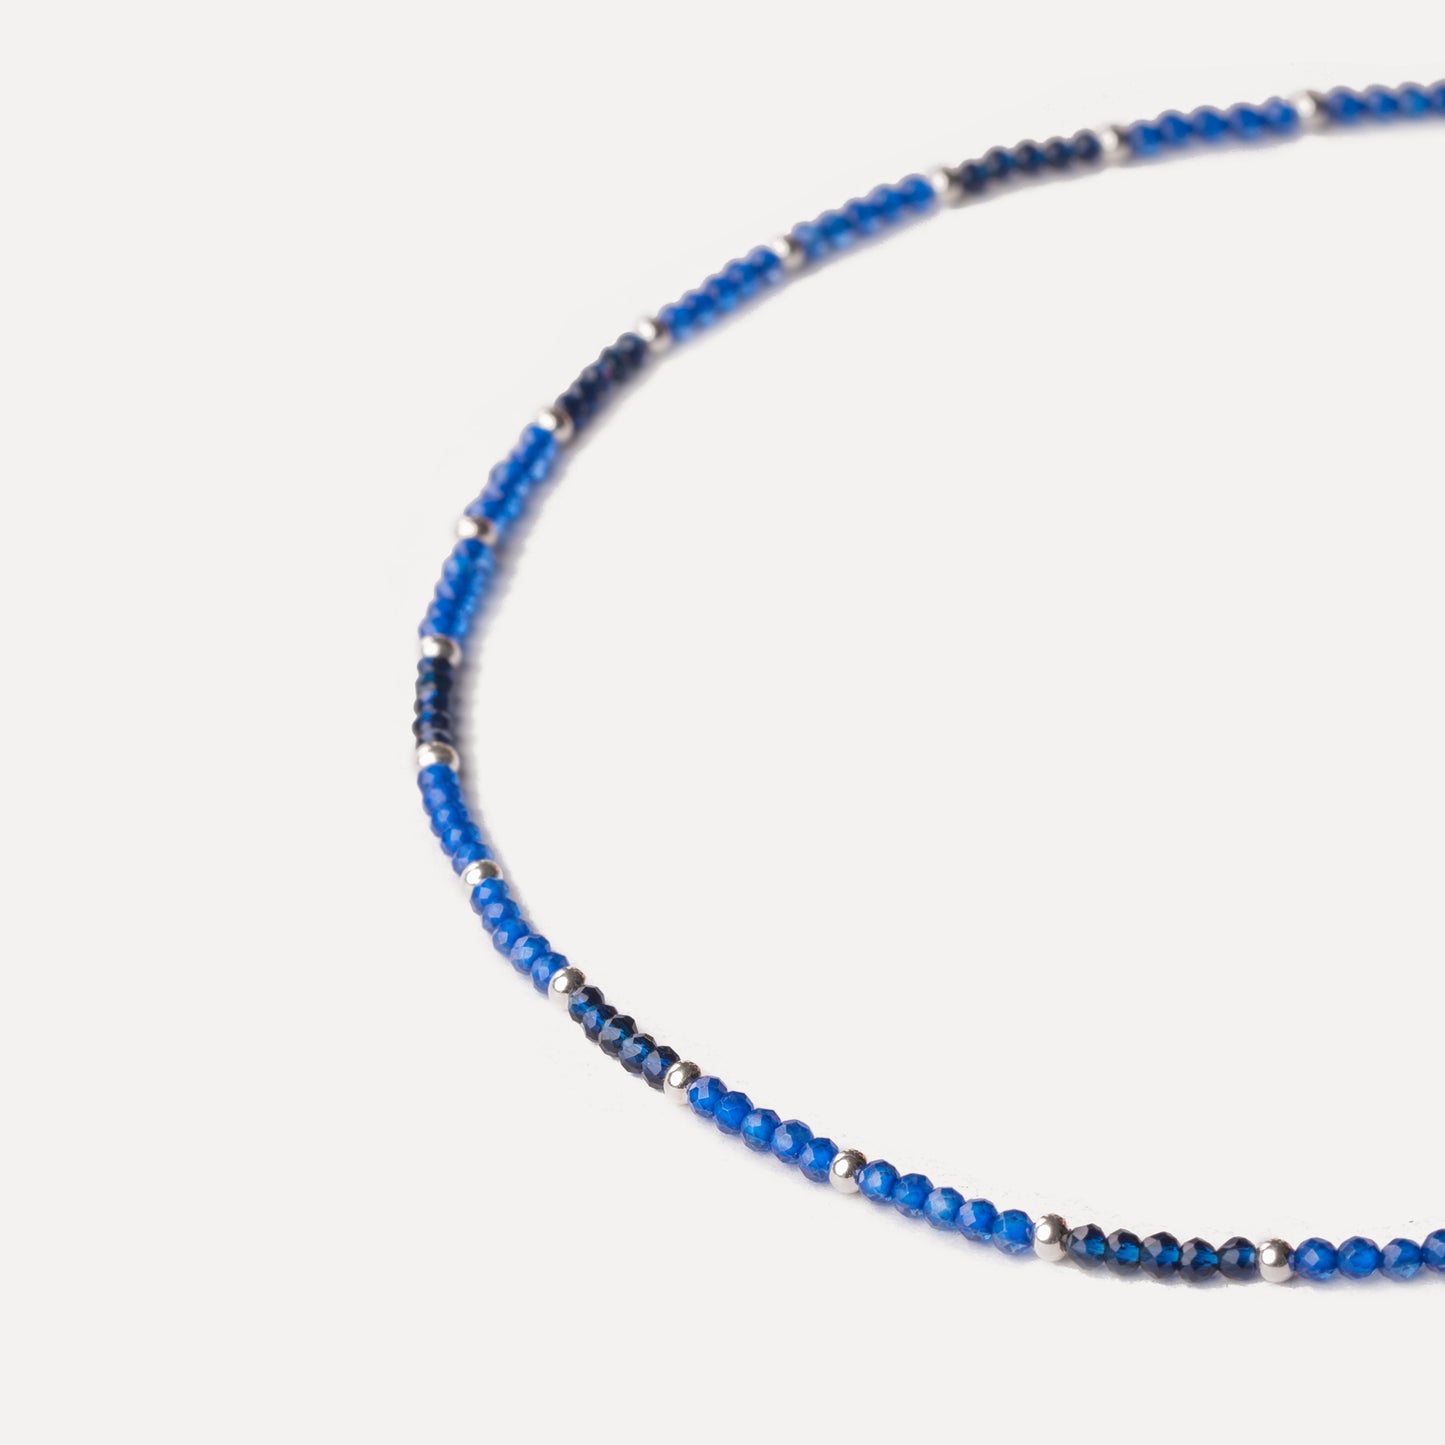 2mm Blue and Navy Corundum Beaded Necklace